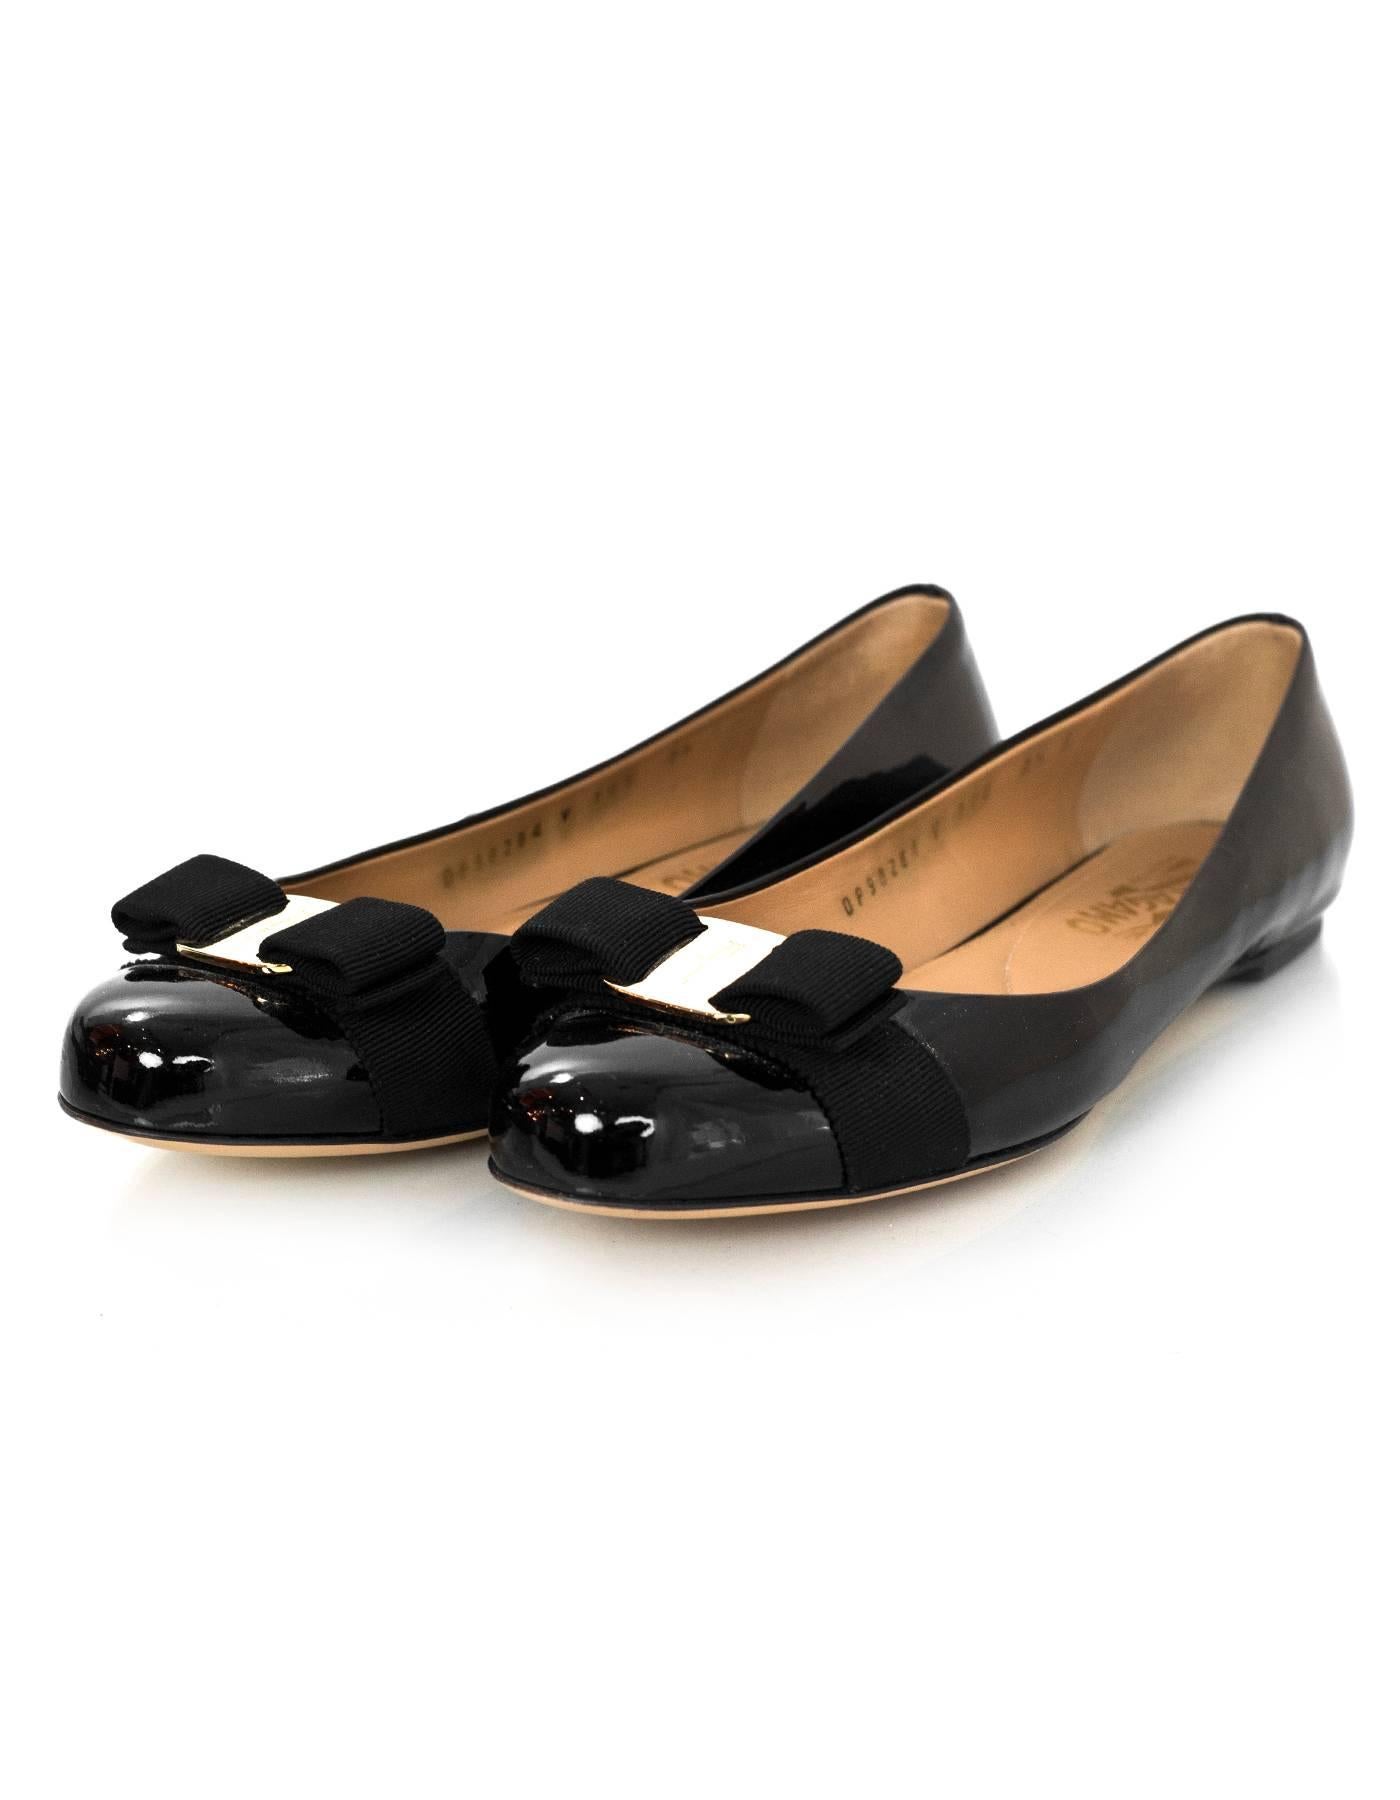 Salvatore Ferragamo Black Patent Leather Varina Bow Flats Sz 7.5C

*This shoe runs wide*

Made In: Italy
Color: Black
Materials: Patent leather
Closure/Opening: Slide on
Sole Stamp: Salvatore Ferragamo Made in Italy
Retail Price: $550 + tax
Overall